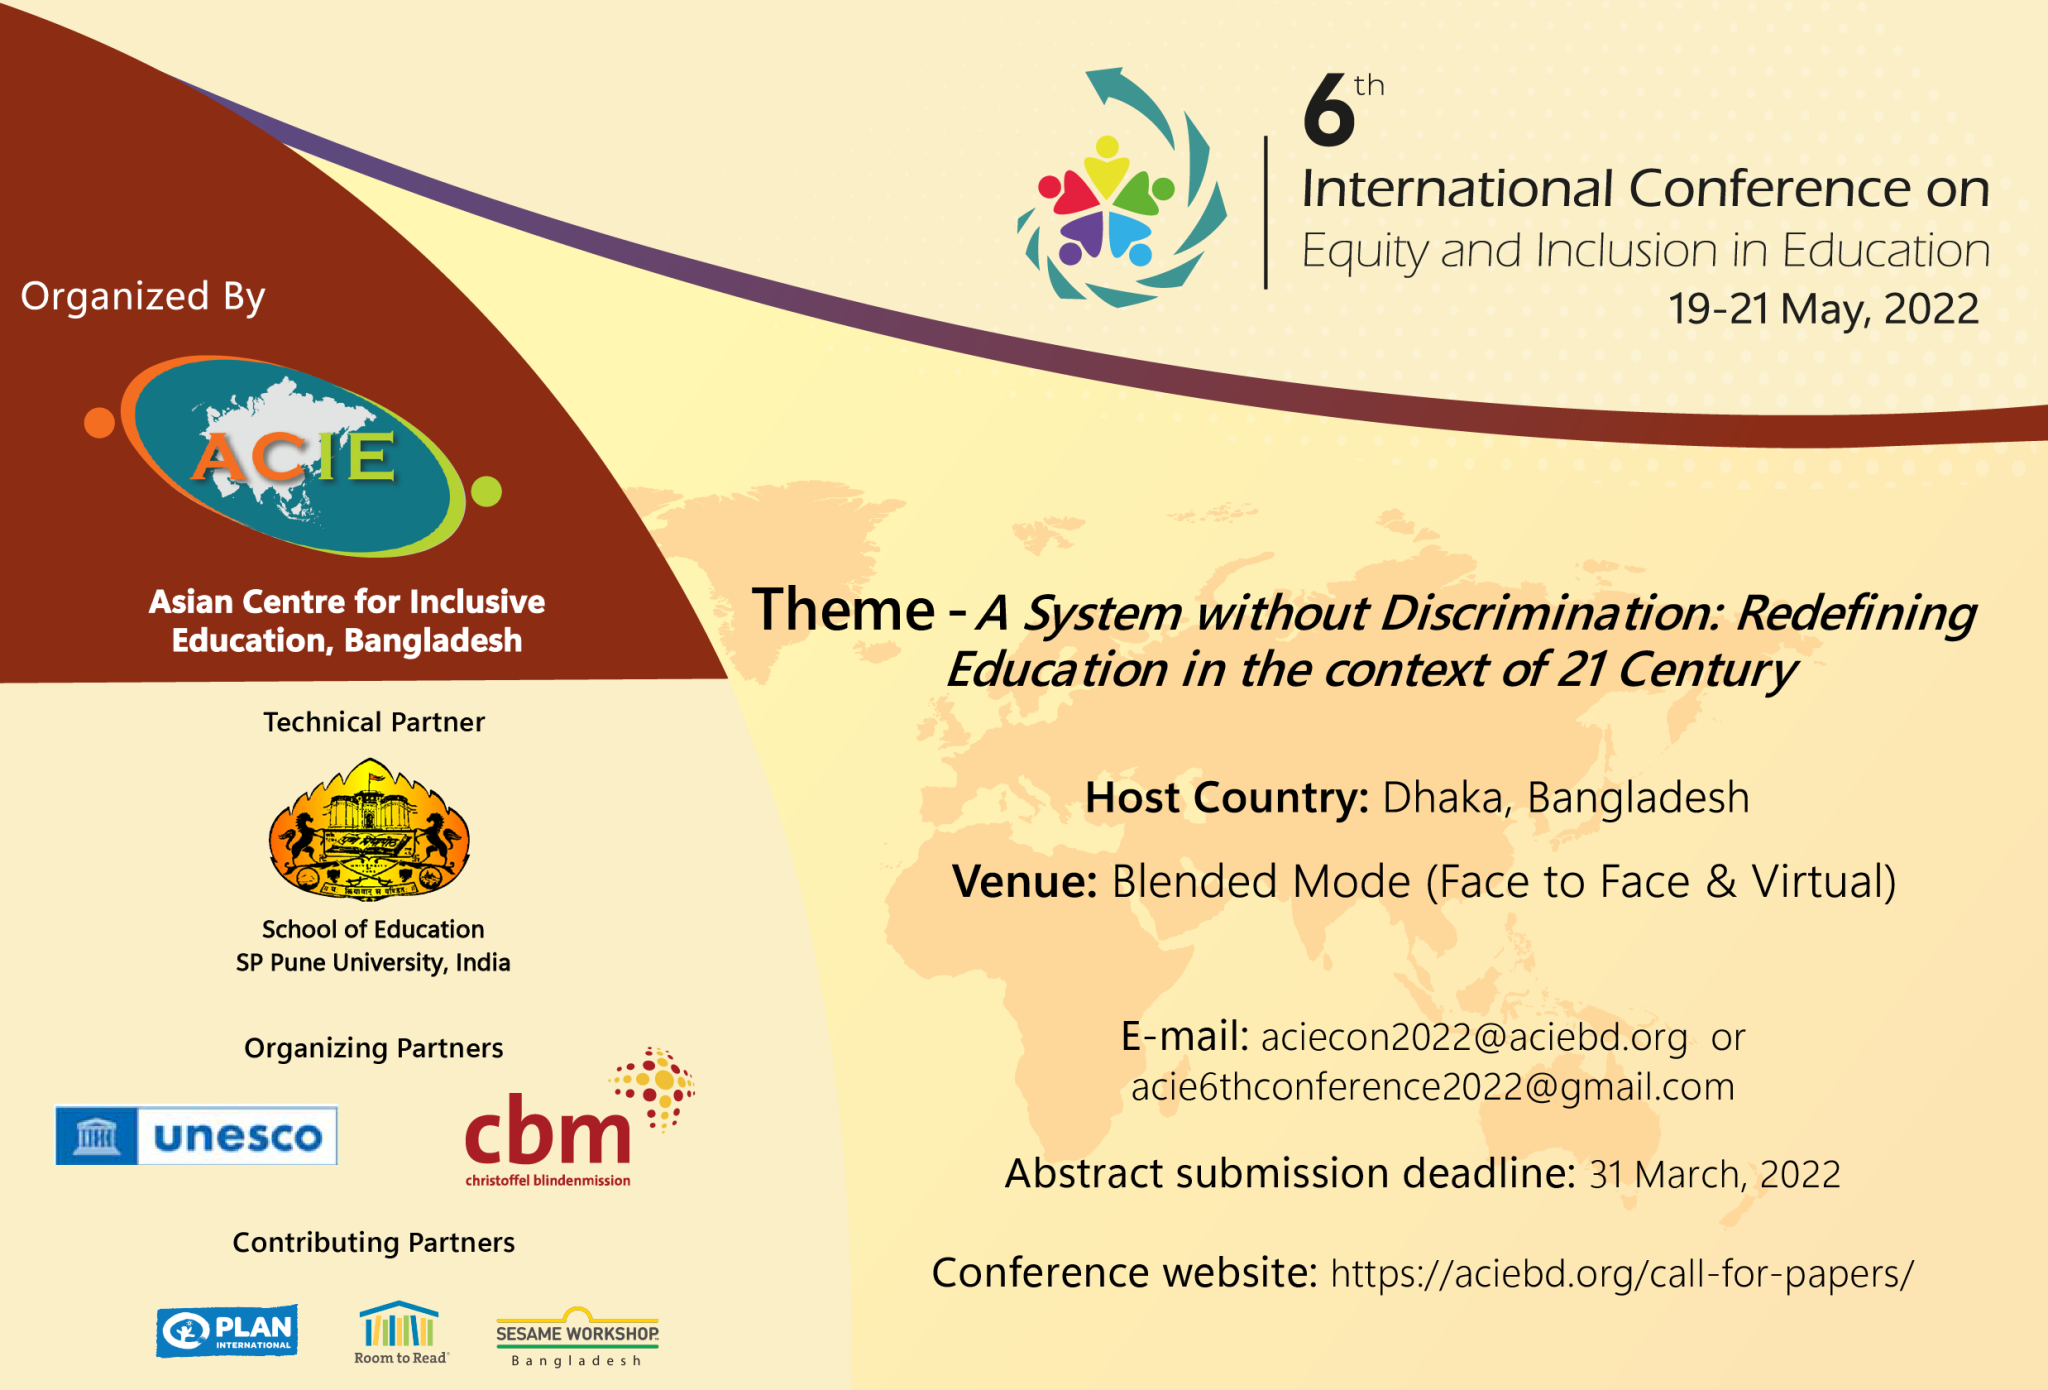 6th International Conference on Equity and Inclusion in Education 19-21 May, 2022.